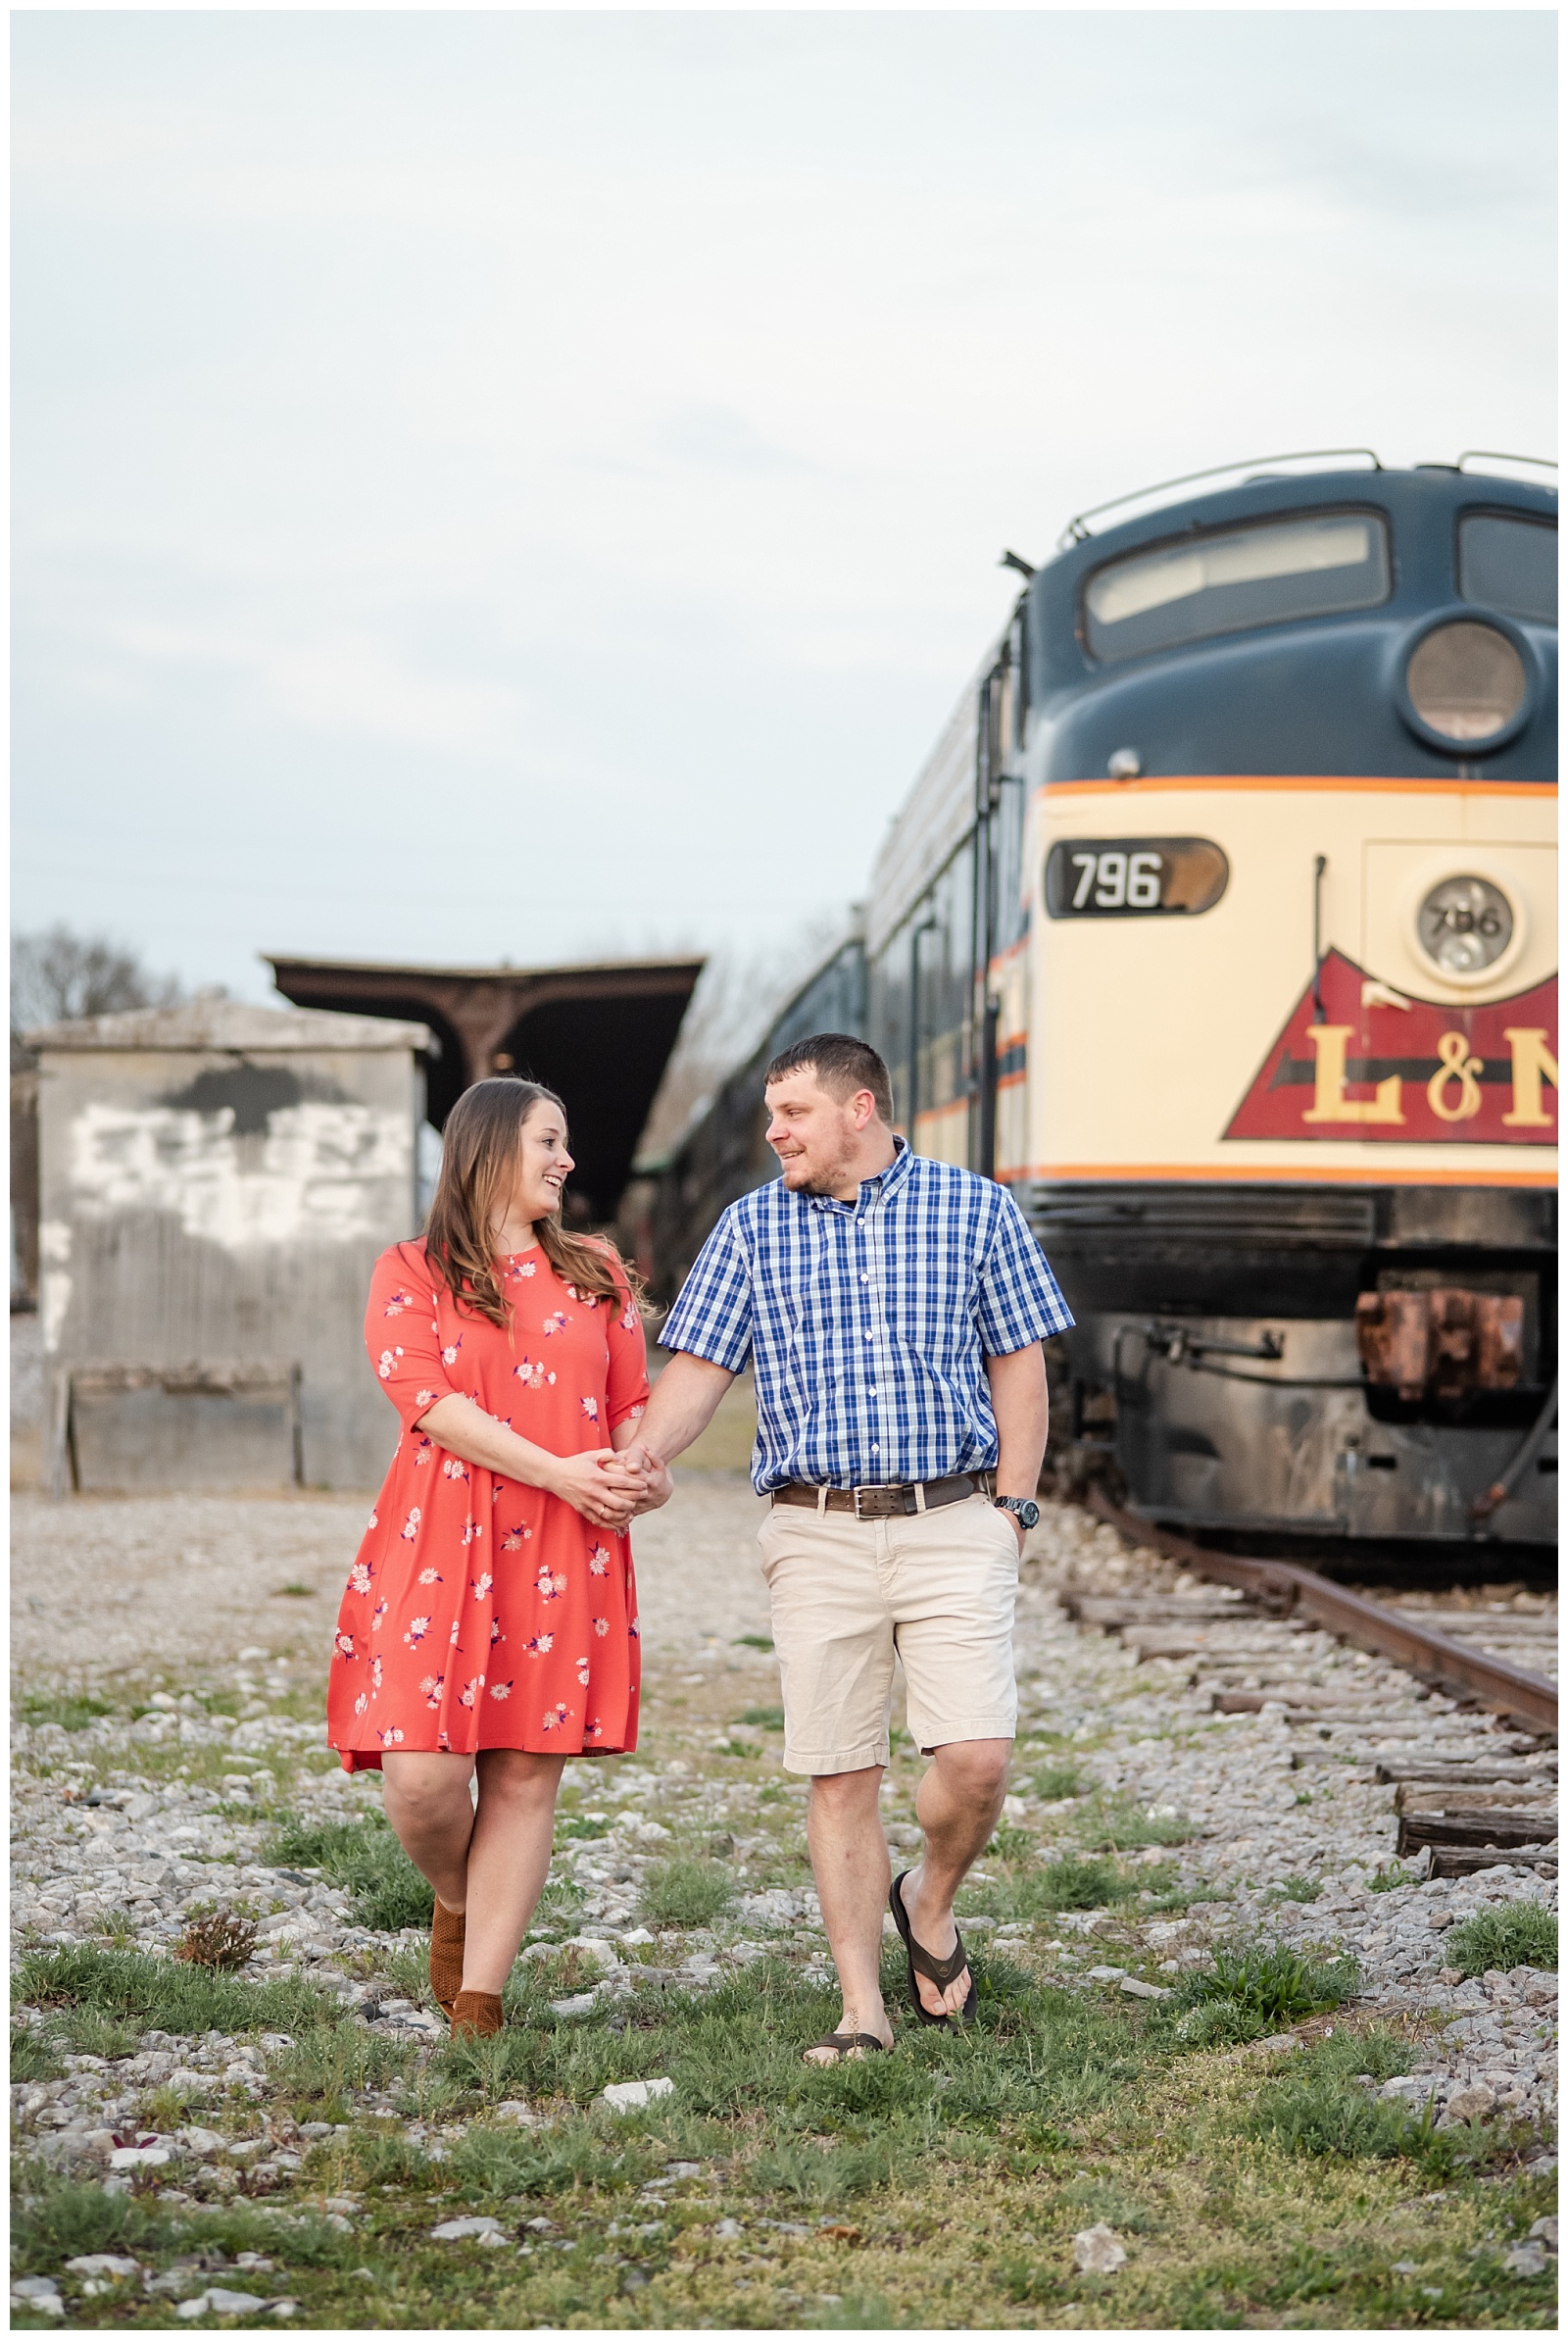 Victoria+Mark Bowling Green Spring Engagement Session